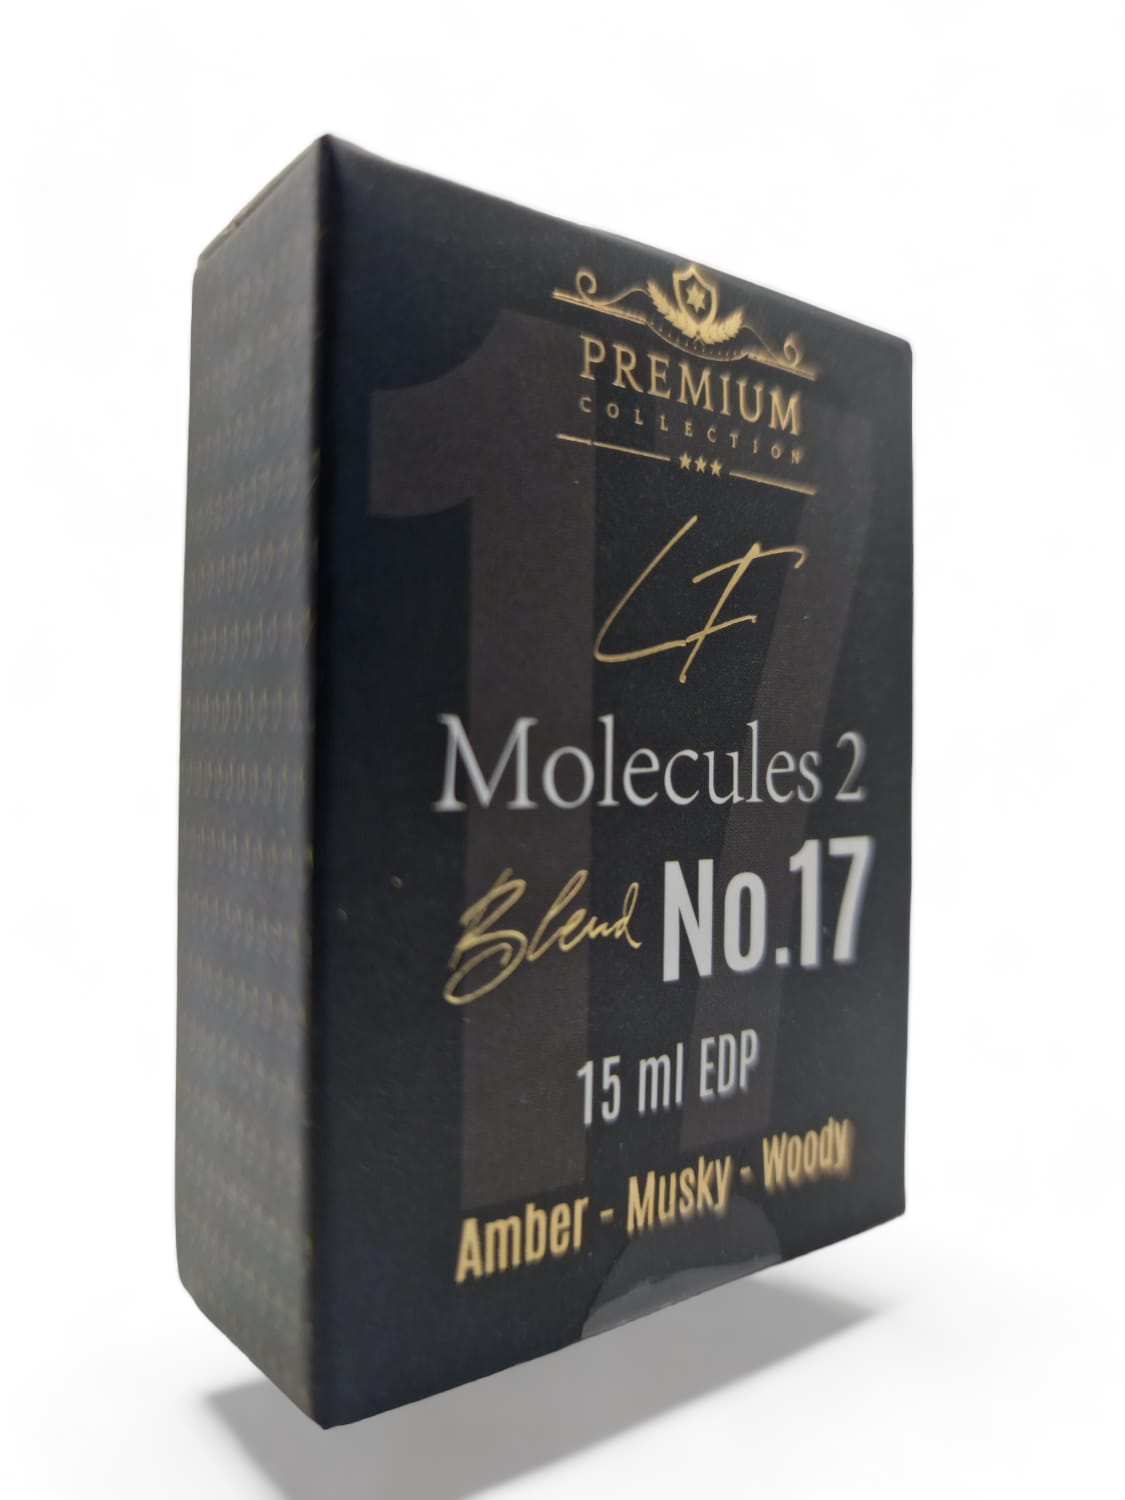 Blend No.17 Molecules 2 by Livfragrance® Signature Collection